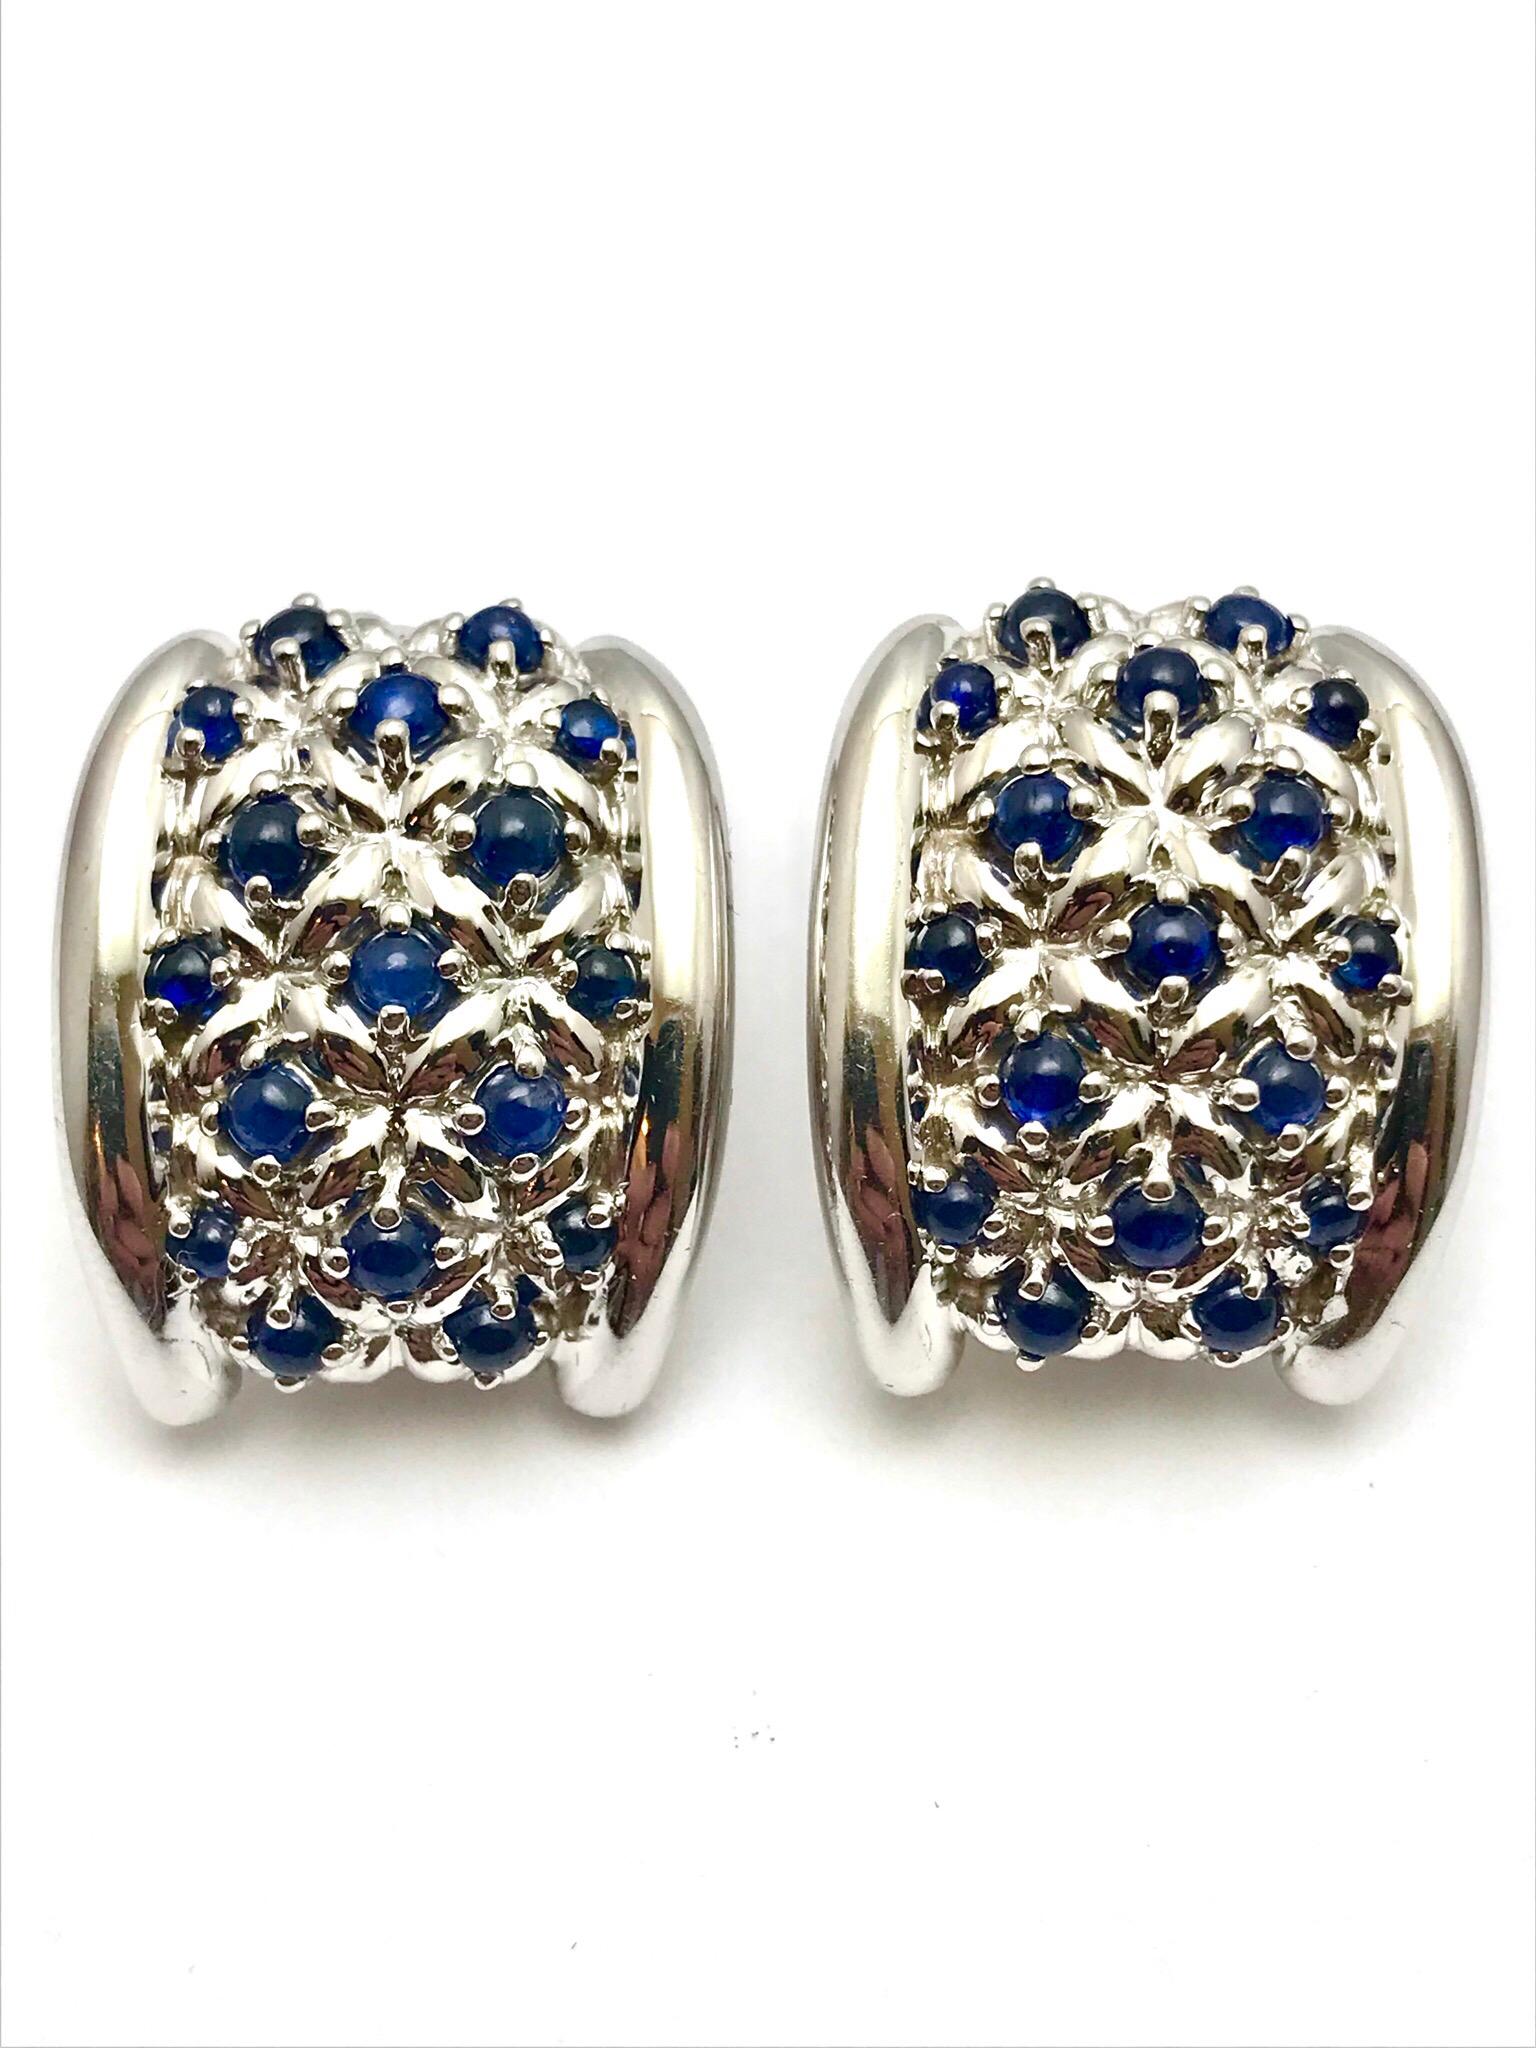 A pair of cabochon sapphire and 18 karat white gold clip/post earrings designed Andreoli of Italy.  Each earring contains 17 sapphire combining for a total weight of 1.70 carats.  The sapphire are prong set on a slightly curved surface with a fold